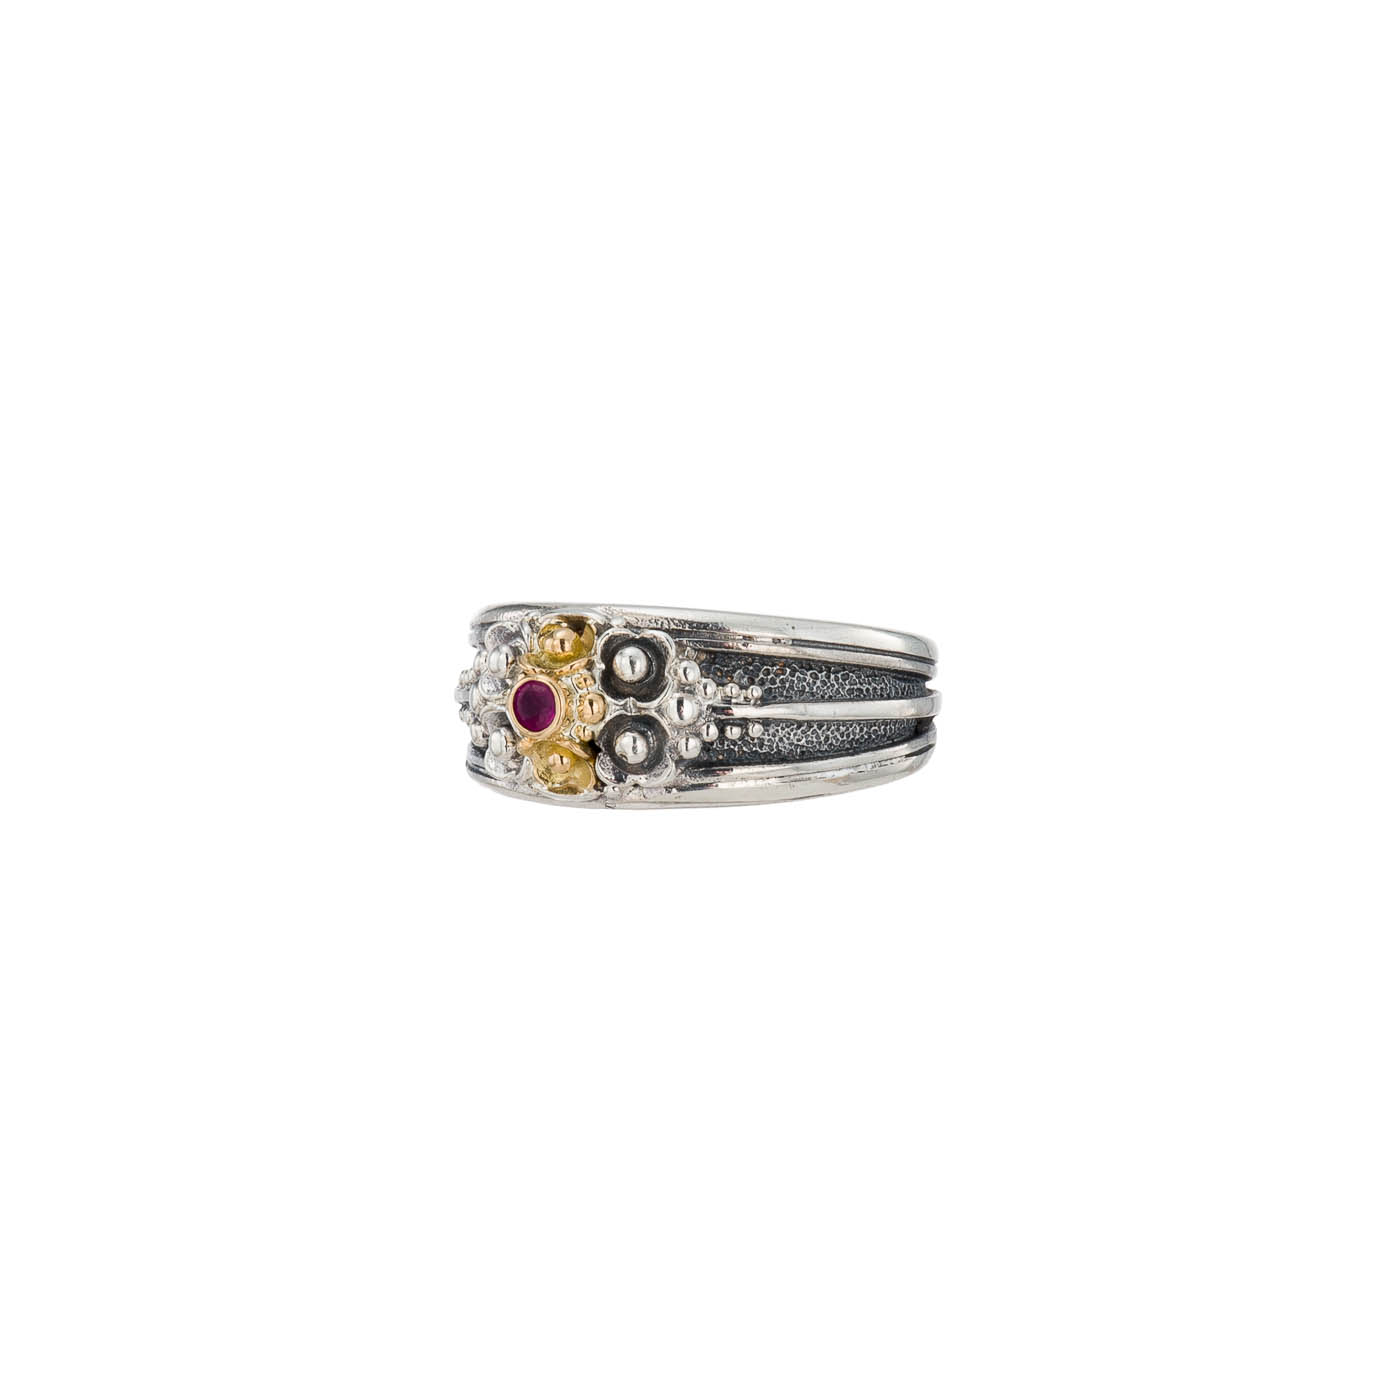 Kassandra flower ring in 18K and Sterling Silver with ruby